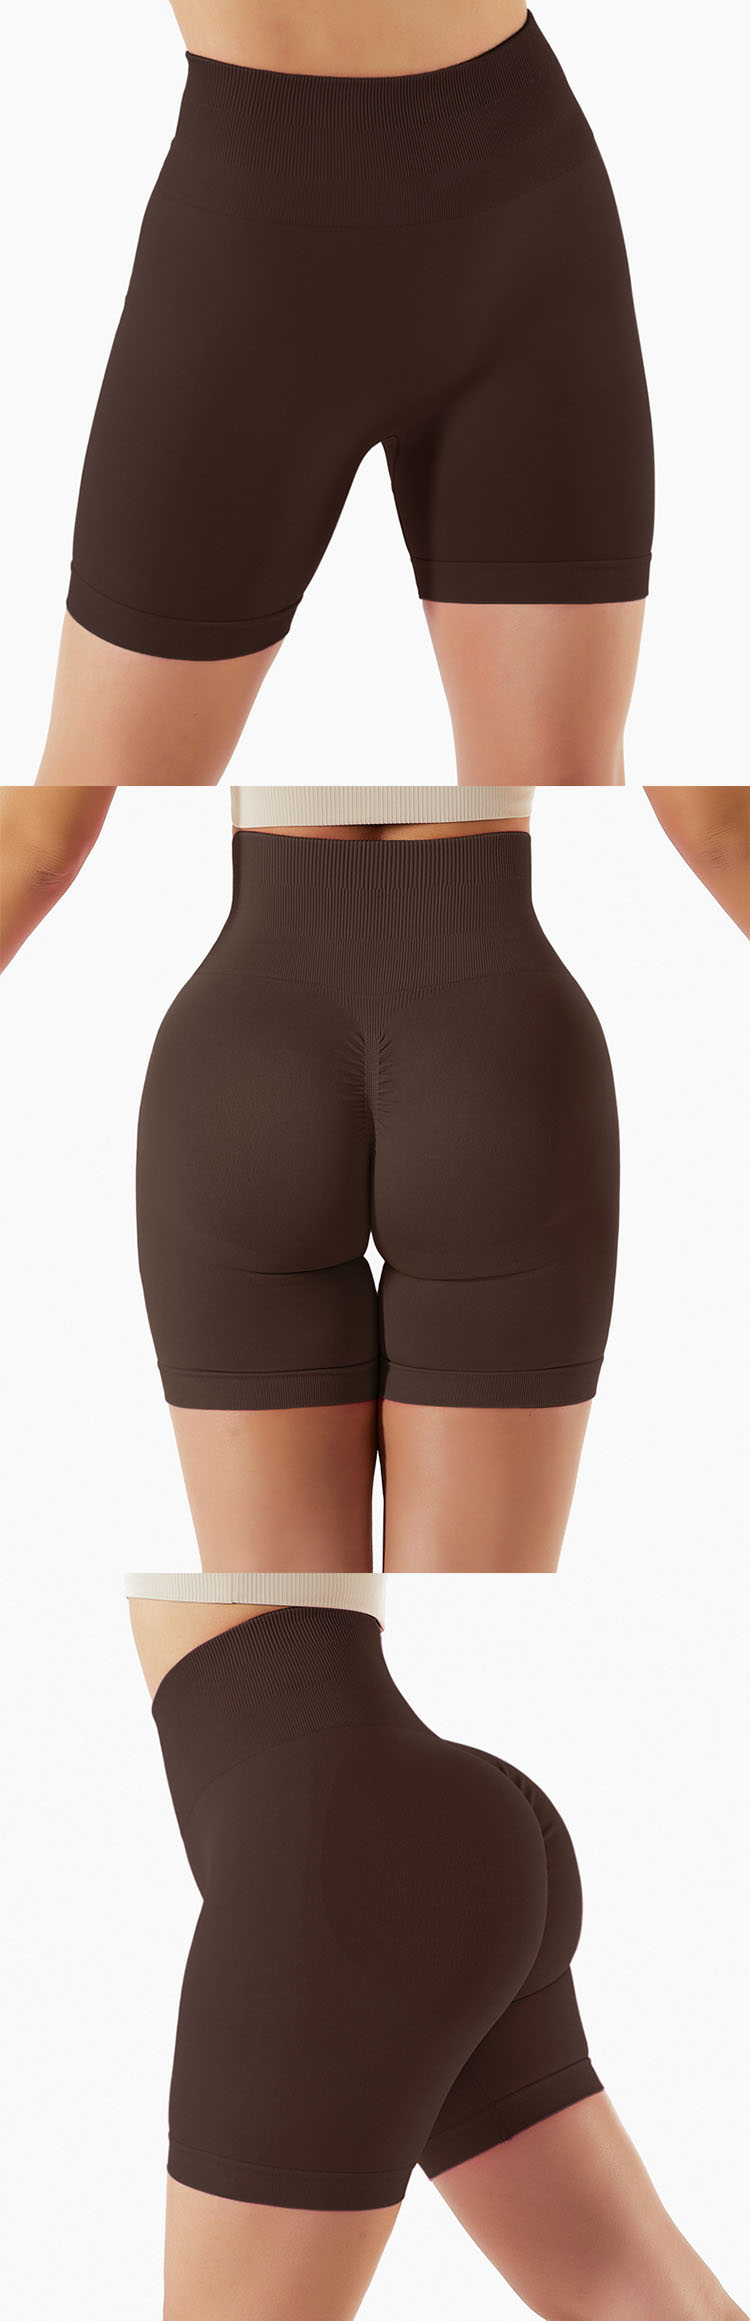 The waist is specially designed with rich layers and provides different shaping effects